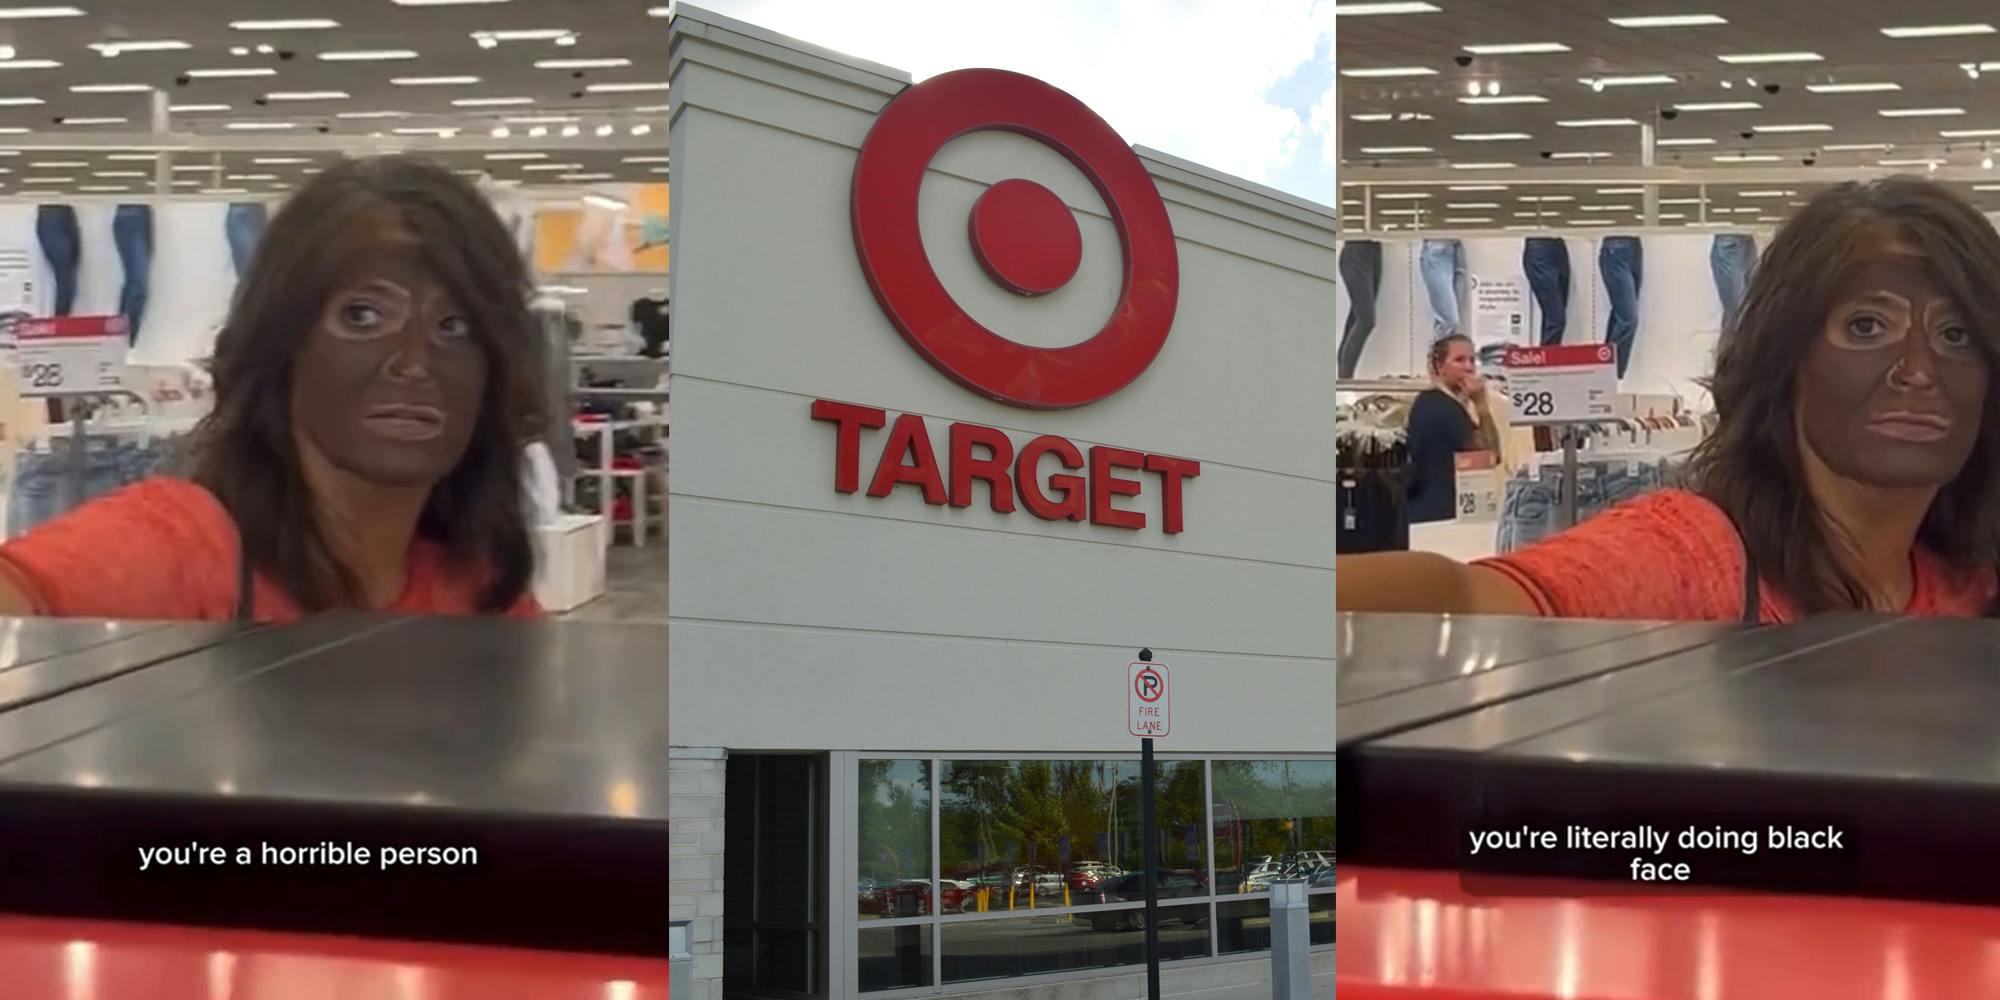 woman in blackface at Target with caption "you're a horrible person" (l) Target building with sign (c) woman in blackface at Target with caption "you're literally doing black face" (r)